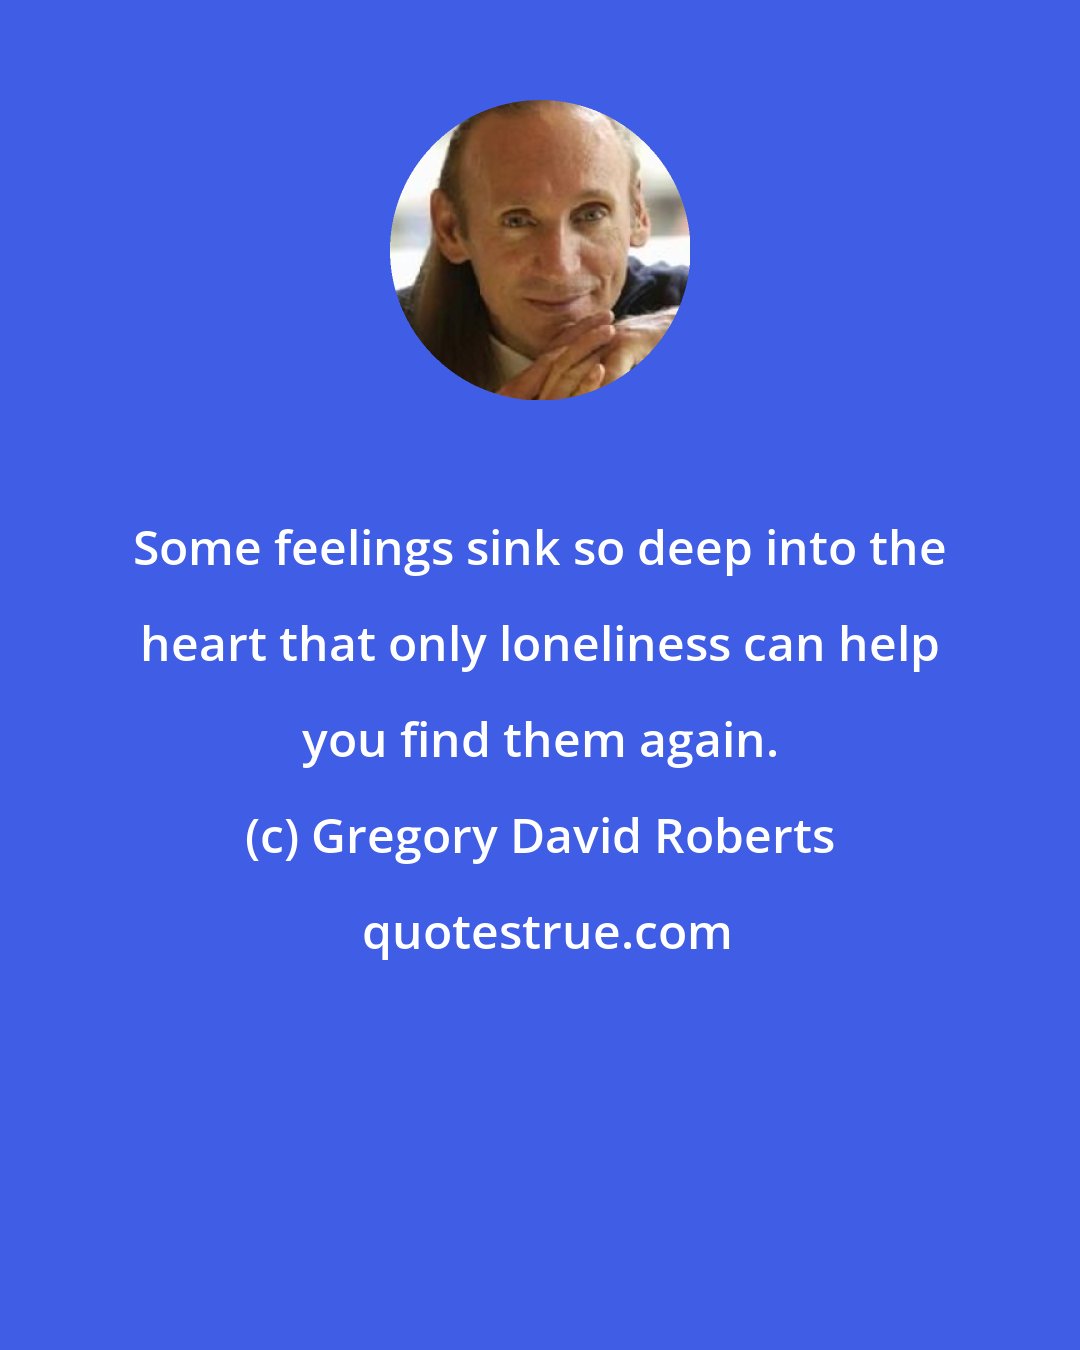 Gregory David Roberts: Some feelings sink so deep into the heart that only loneliness can help you find them again.